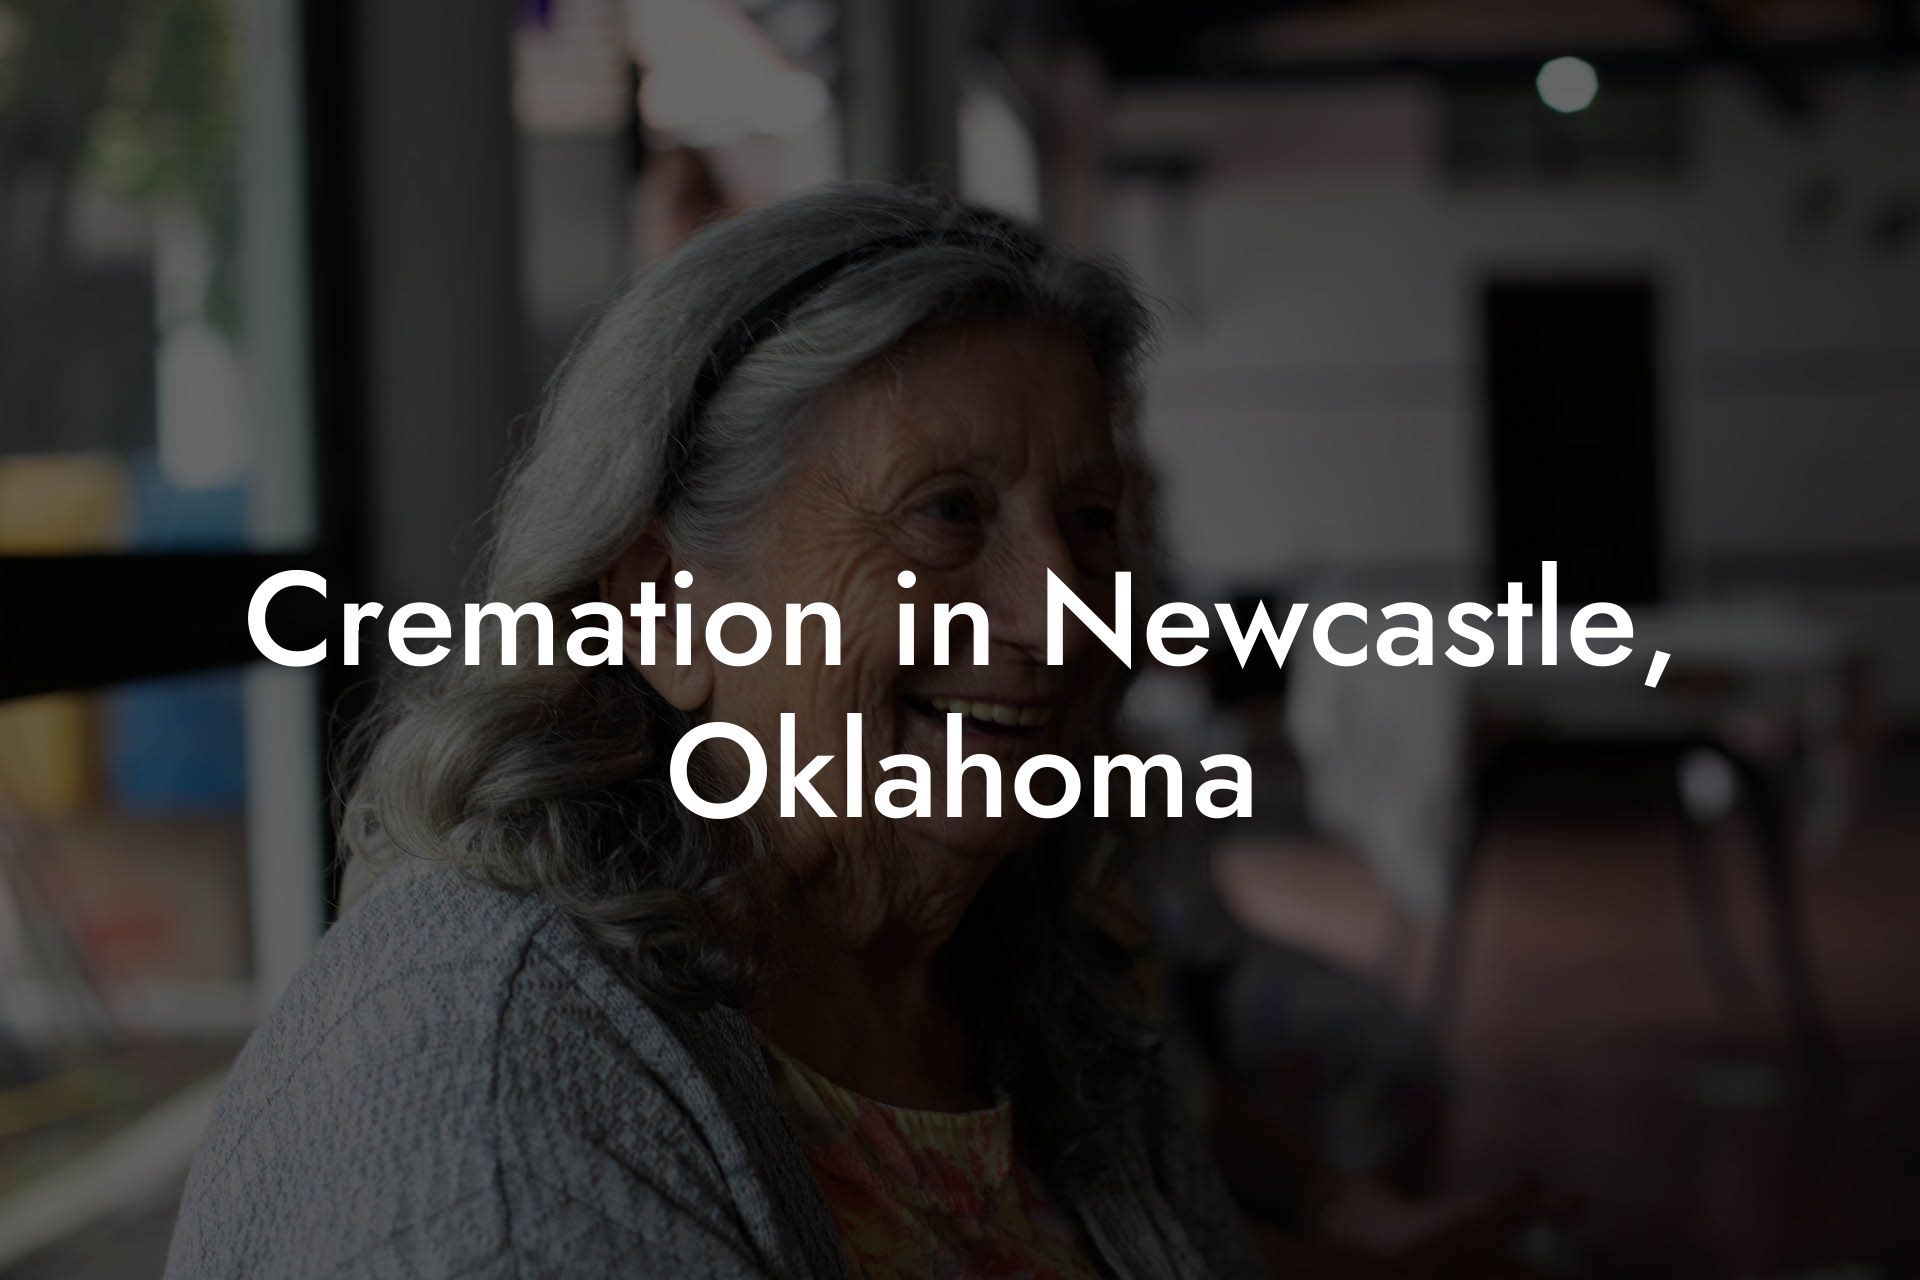 Cremation in Newcastle, Oklahoma